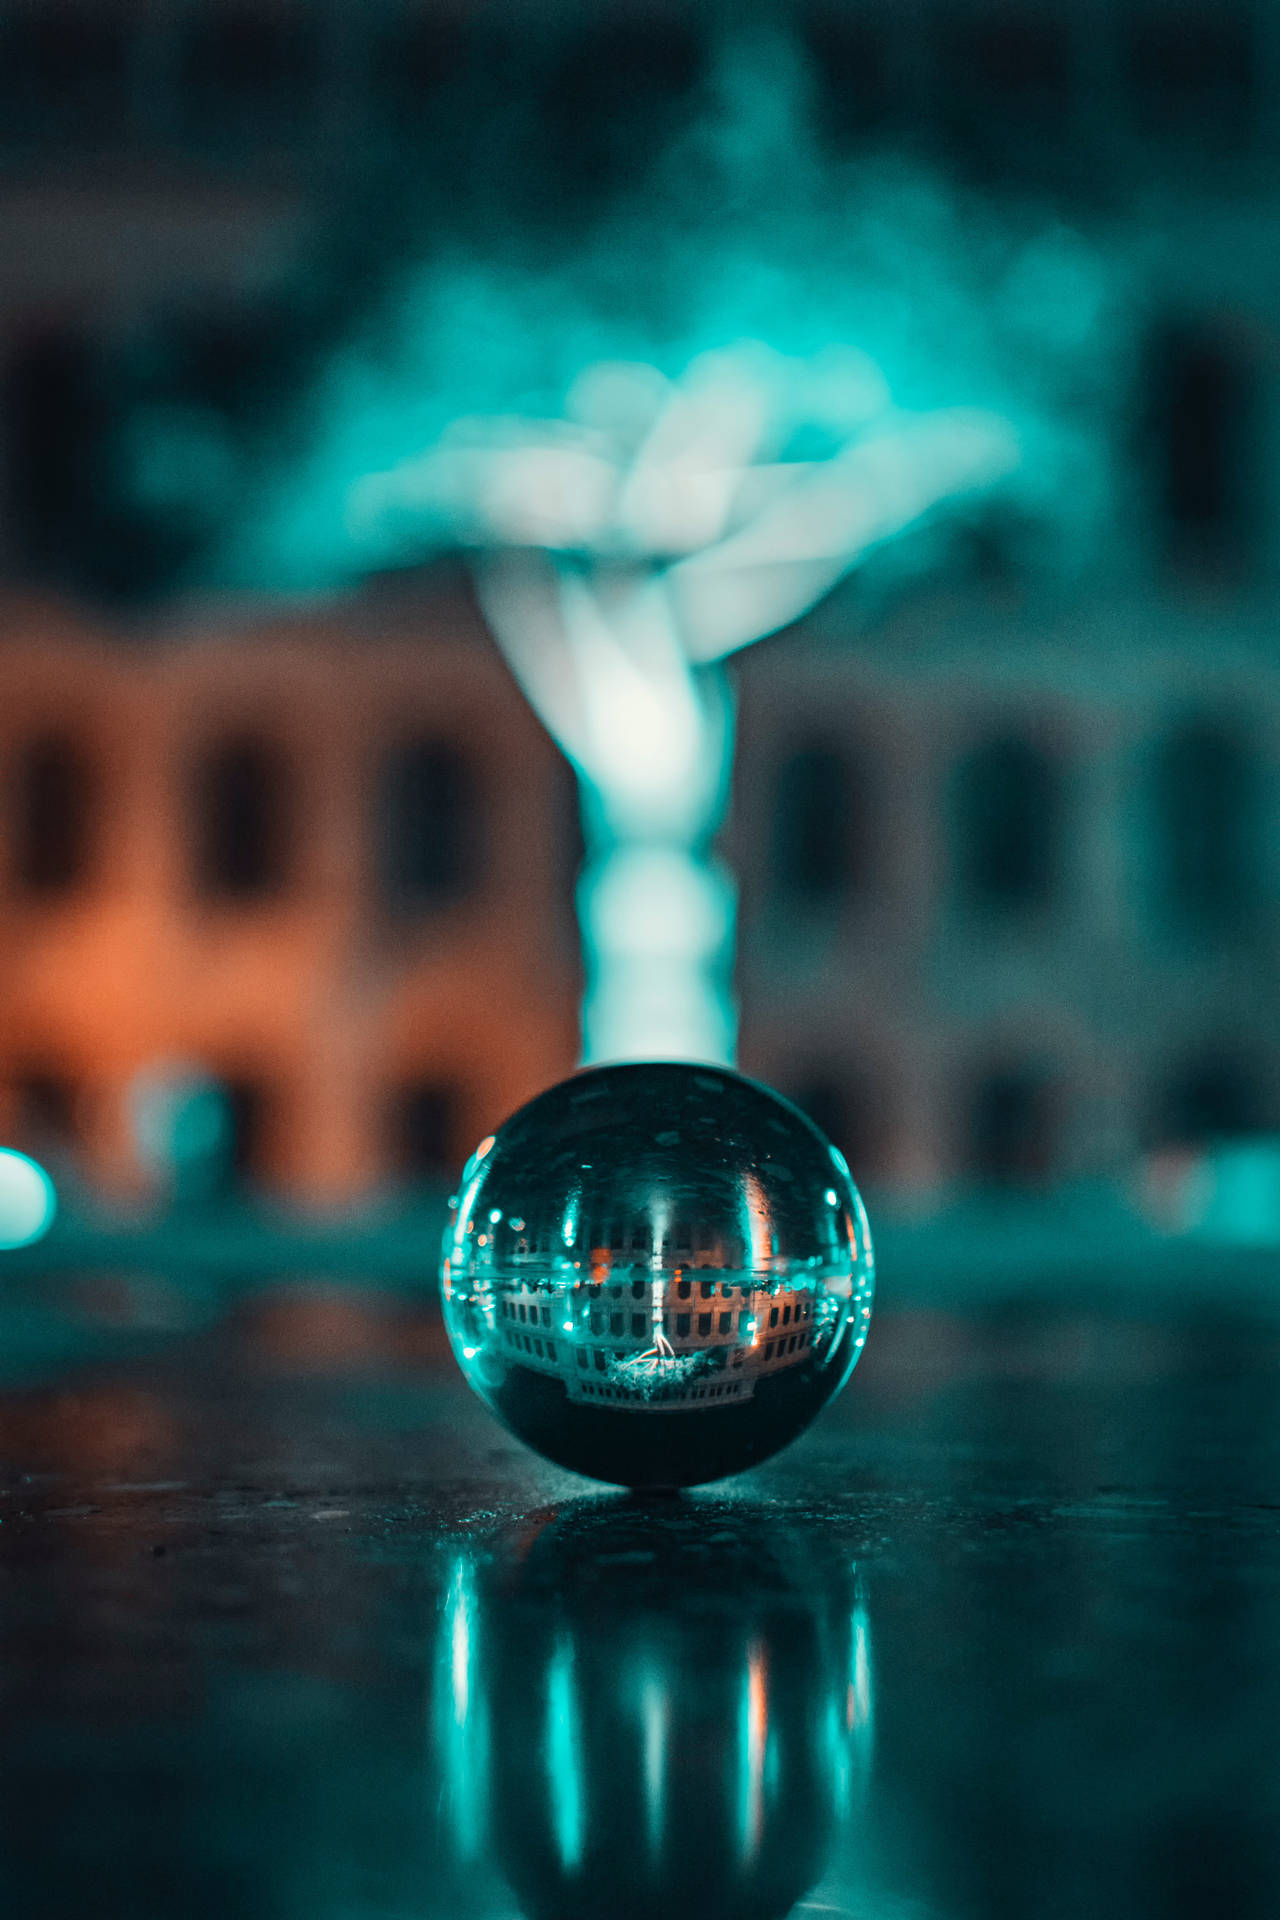 Reflective Steel Ball 4k Hd Mobile Background